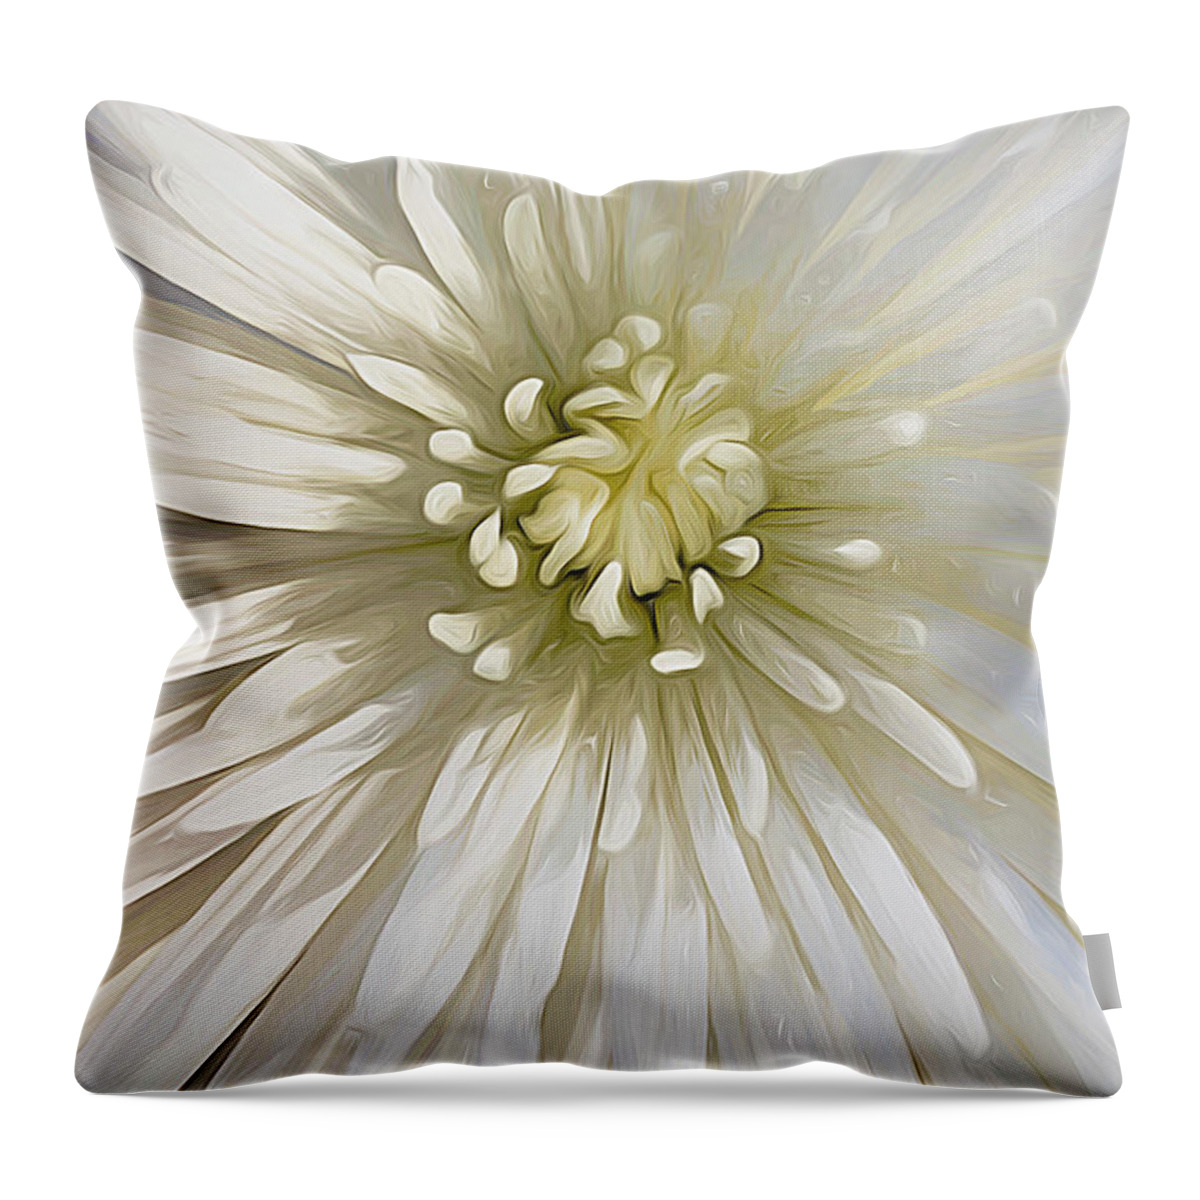 Bloom Throw Pillow featuring the digital art Bloom - Landscape by Cindy Greenstein